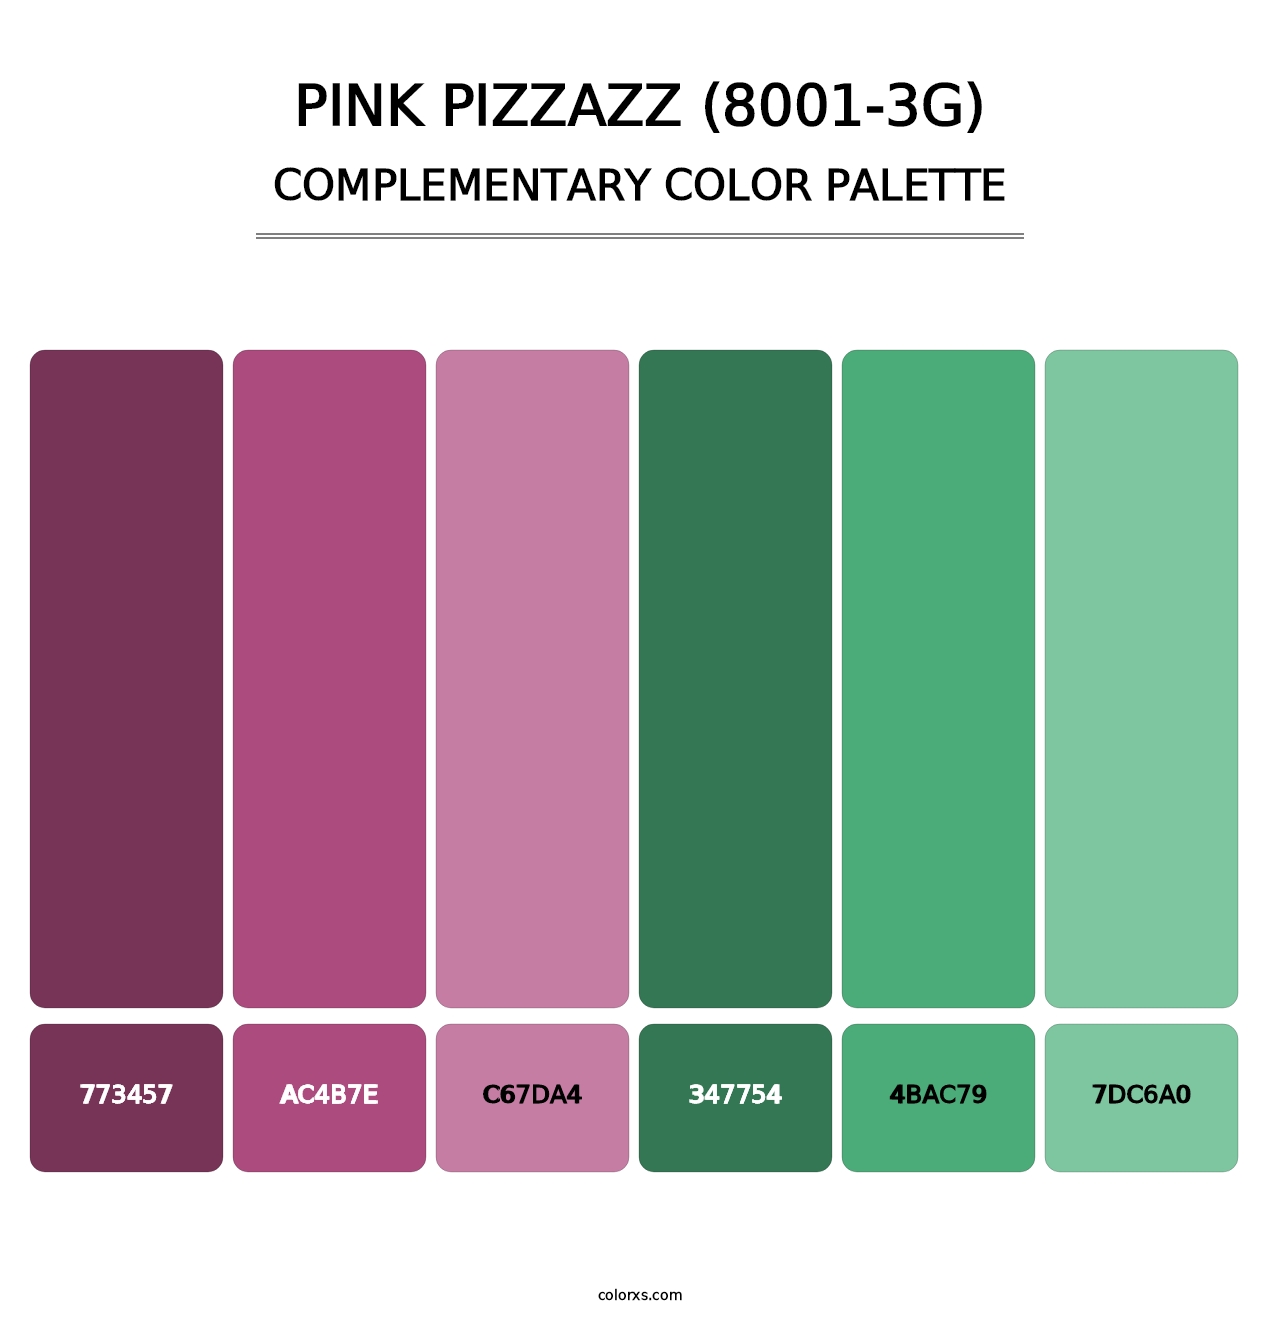 Pink Pizzazz (8001-3G) - Complementary Color Palette